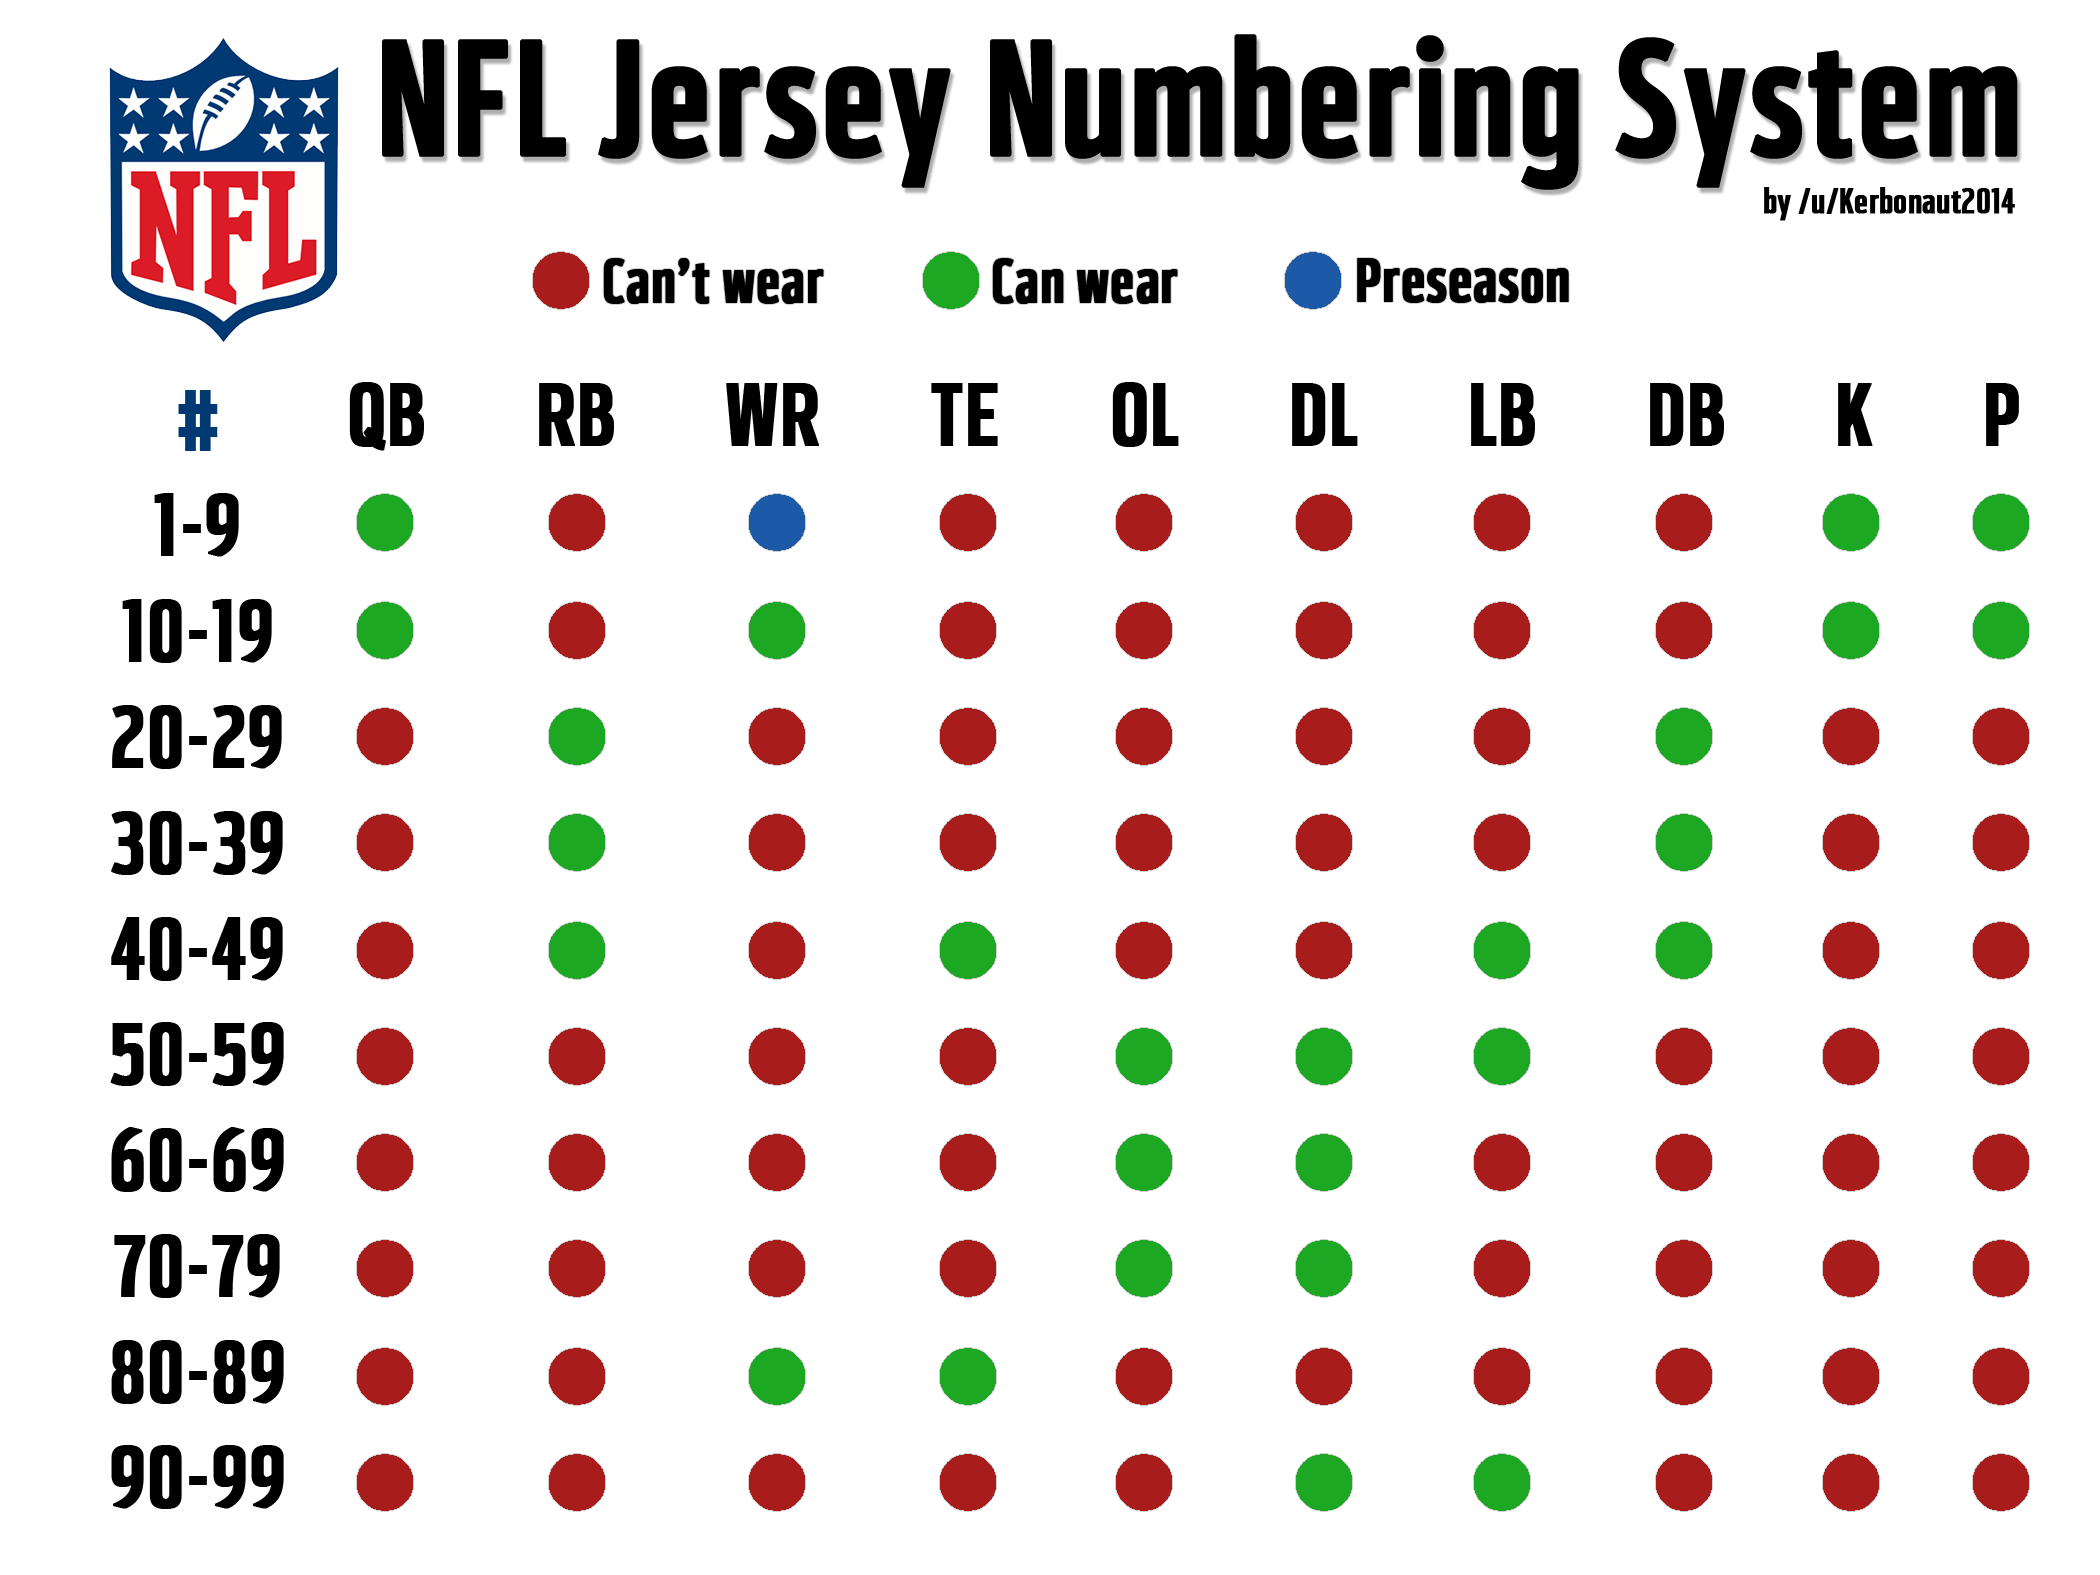 NFL players get to pick their jersey 